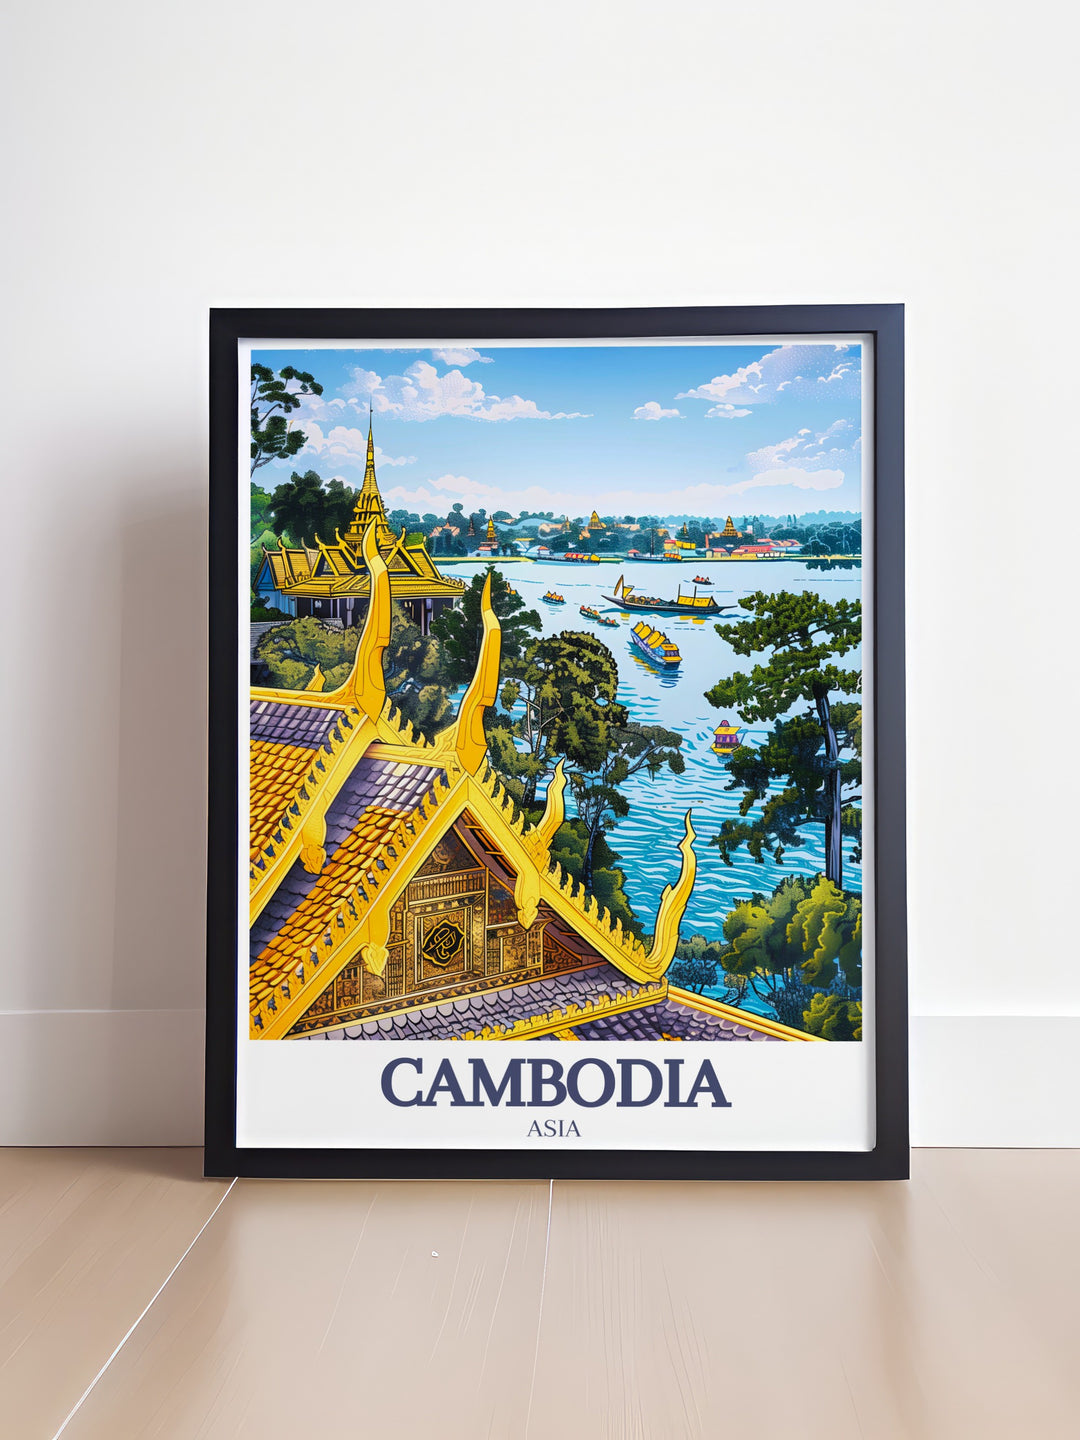 Royal Palace, Phnom Penh, Tonle Sap Lake depicted in an exquisite art print. This wall art celebrates the sophistication and beauty of Cambodian architecture and nature. A perfect addition to any collection of Southeast Asian art and historical prints.